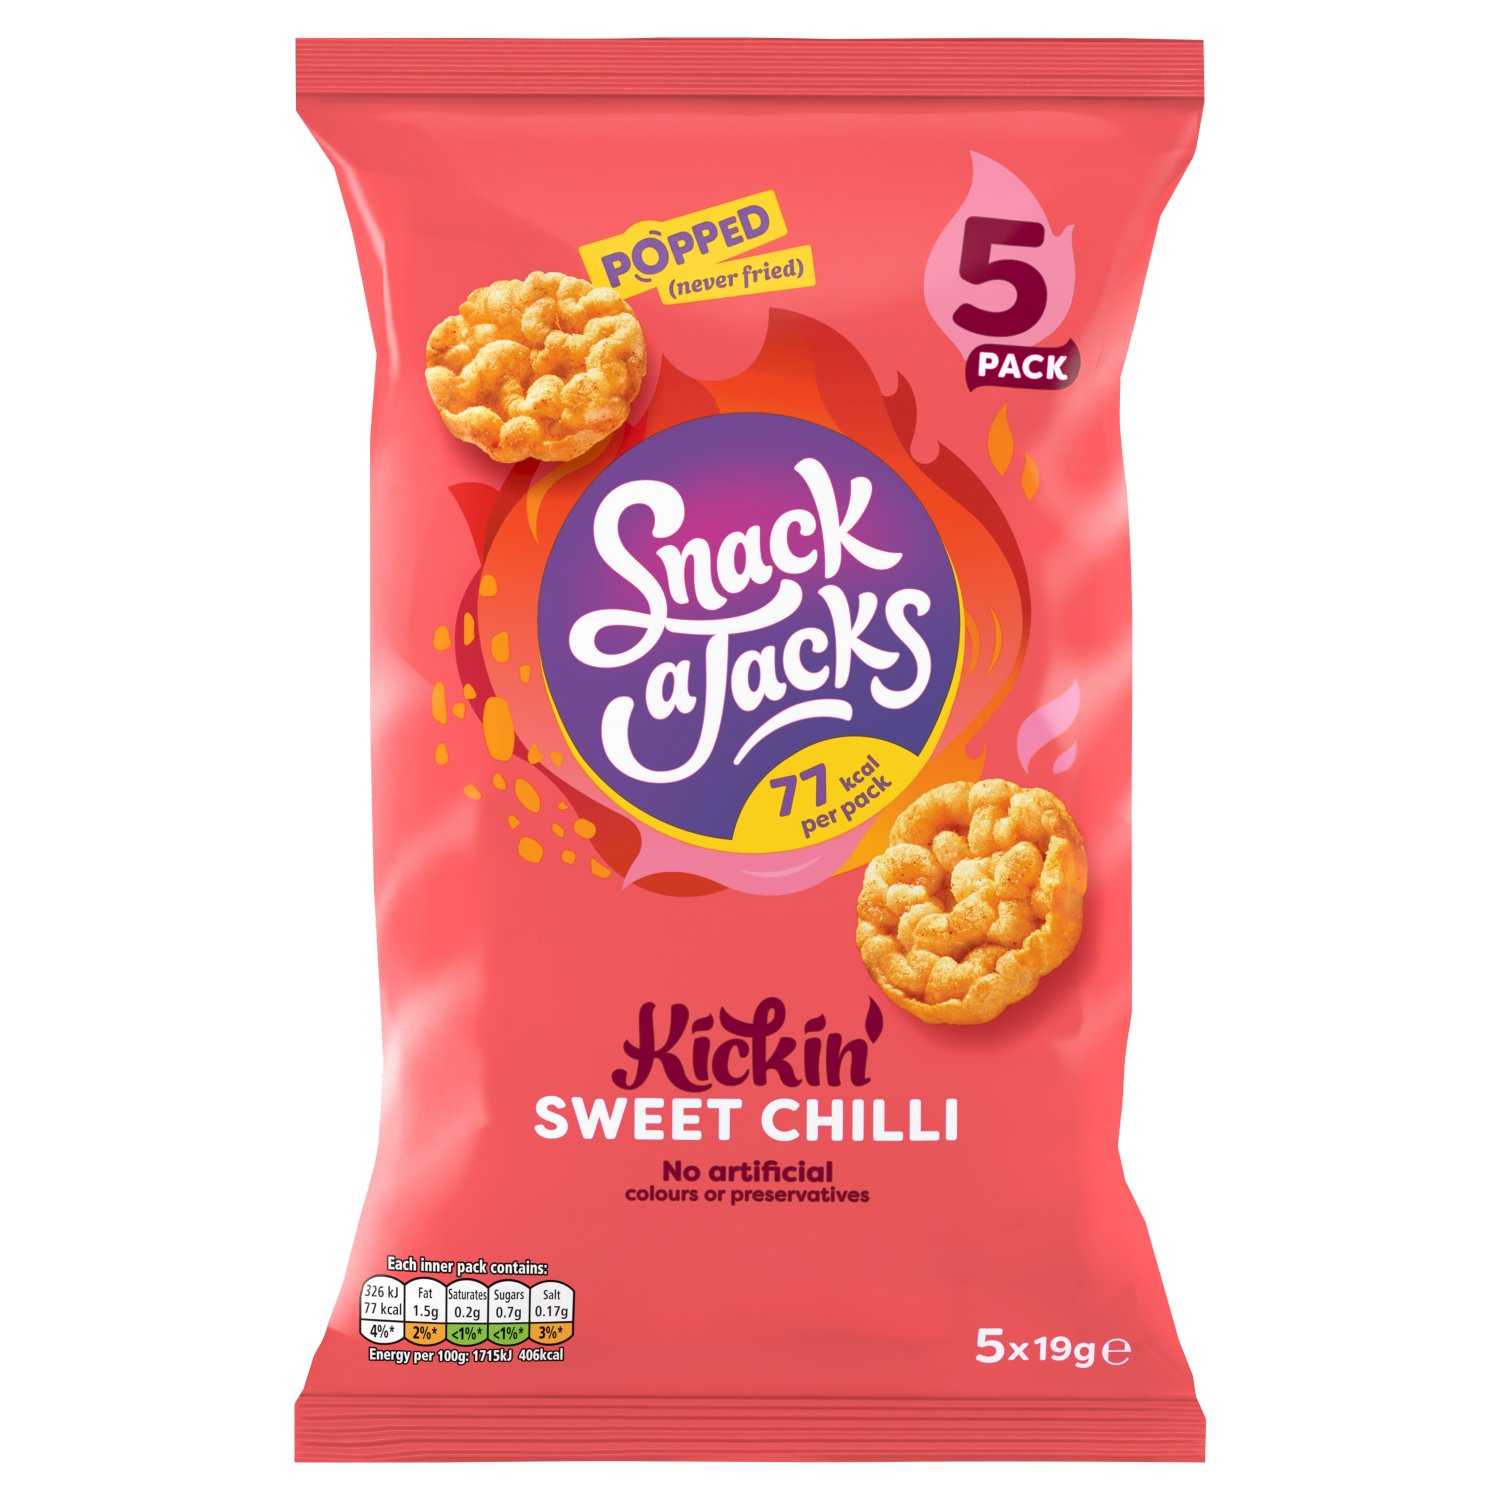 Snack A Jacks Sweet Chilli 5 Pack (95 g)